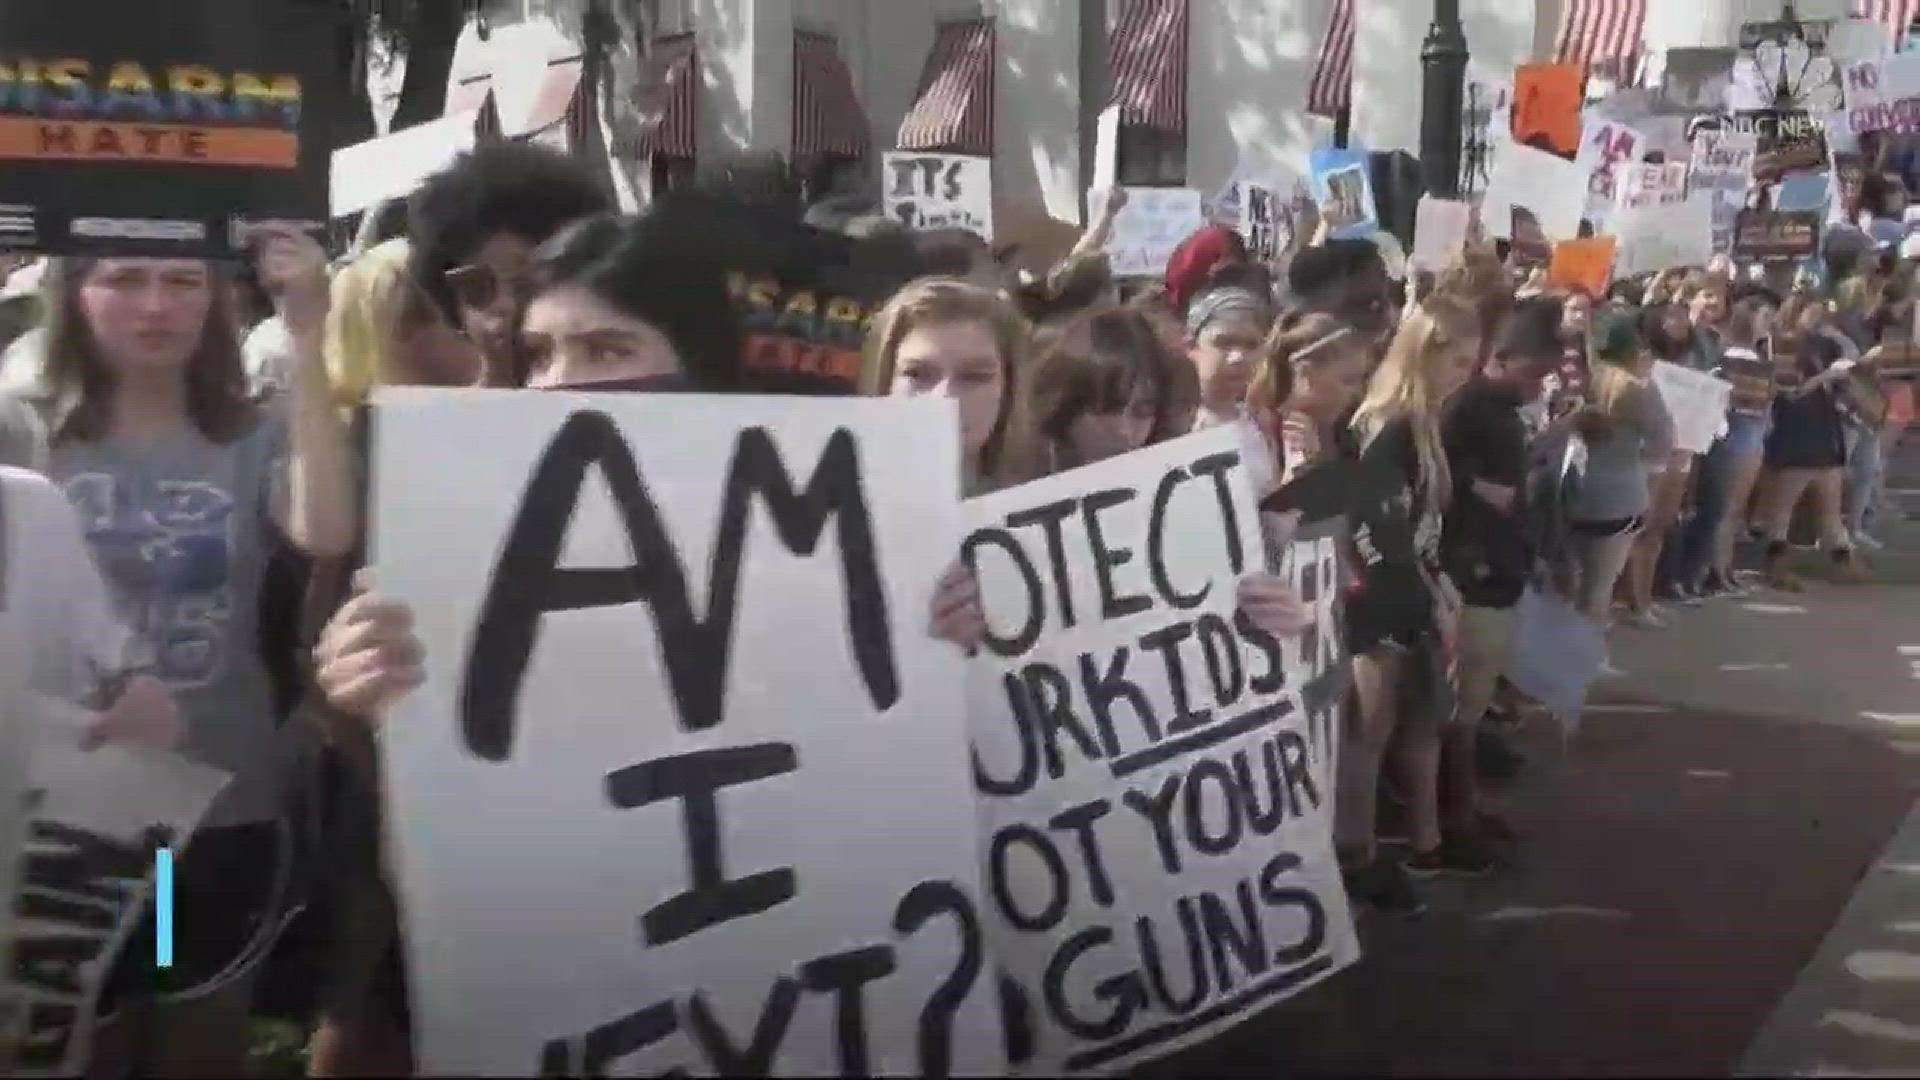 Tens of thousands take part in student walk-outs across the nation, demanding gun control in the wake of last week's deadly massacre in Parkland, Florida.  NBC's Blayne Alexander reports.